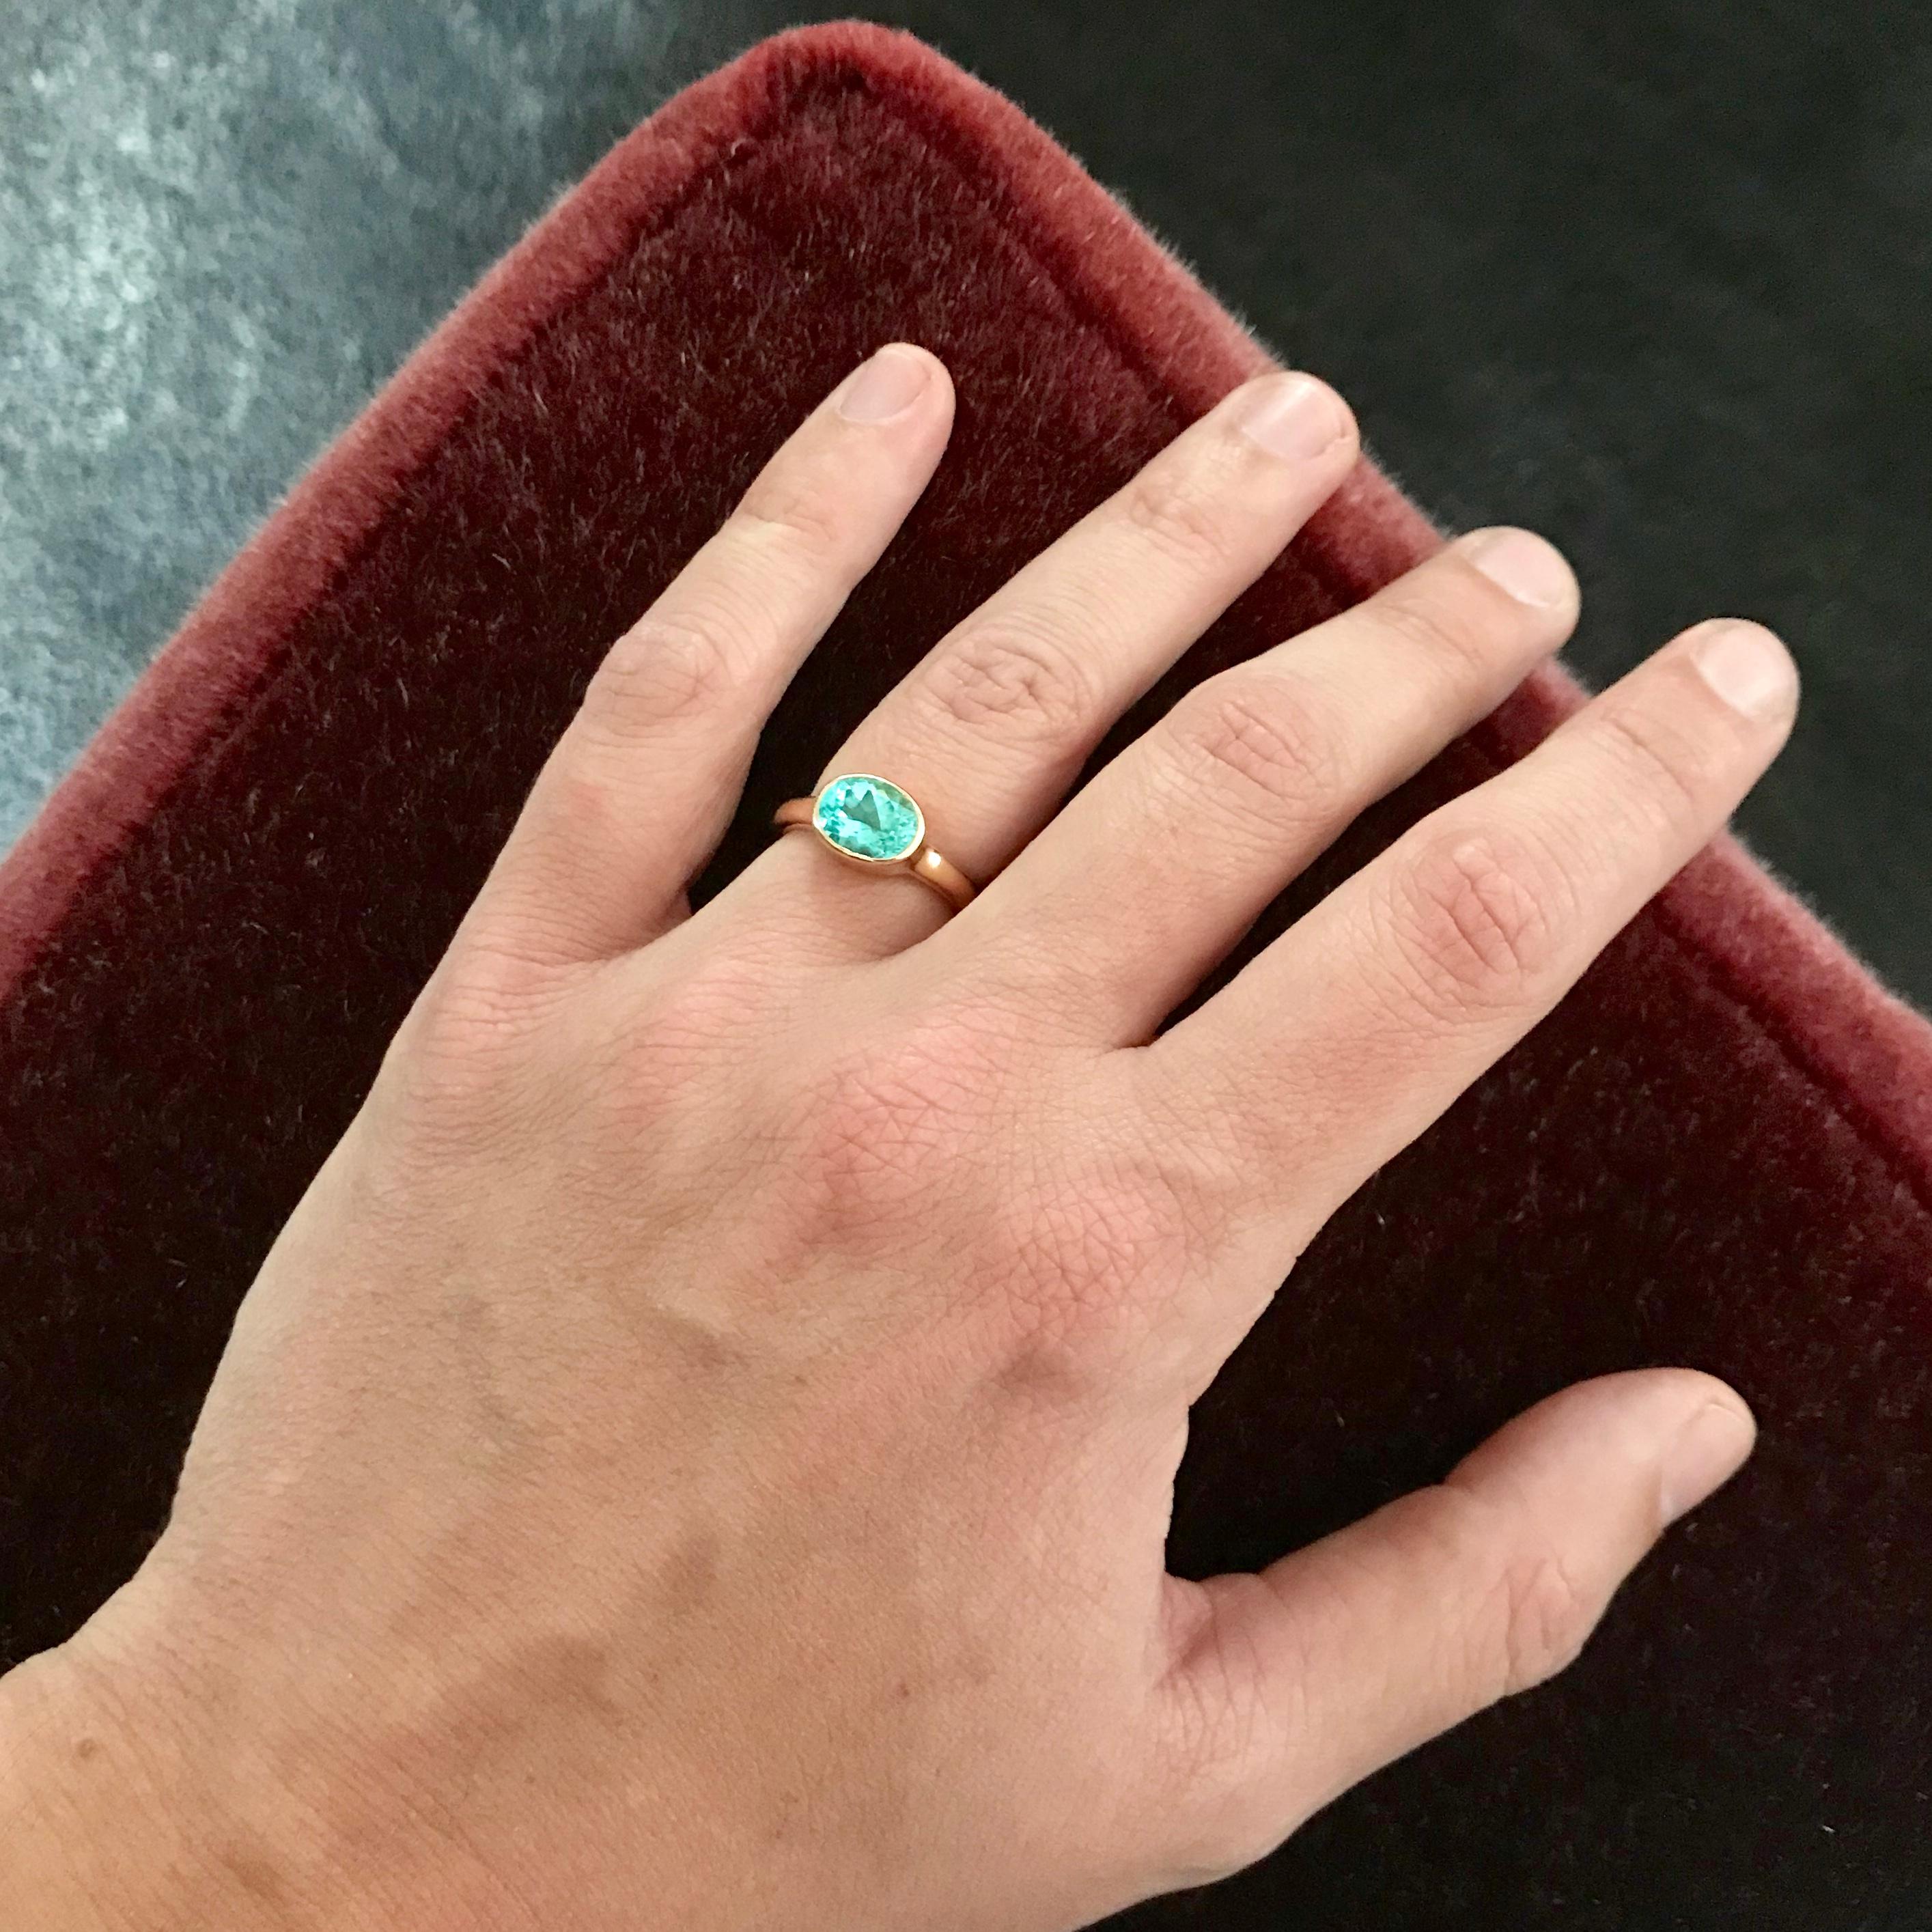 Vivid turquoise and extremely rare African paraiba tourmaline in a beautiful and very comfortable setting in 18 carat rose gold dedicated to flatter the beauty of this 2.43 carat gemstone.

ring size 57 (US 8.0)